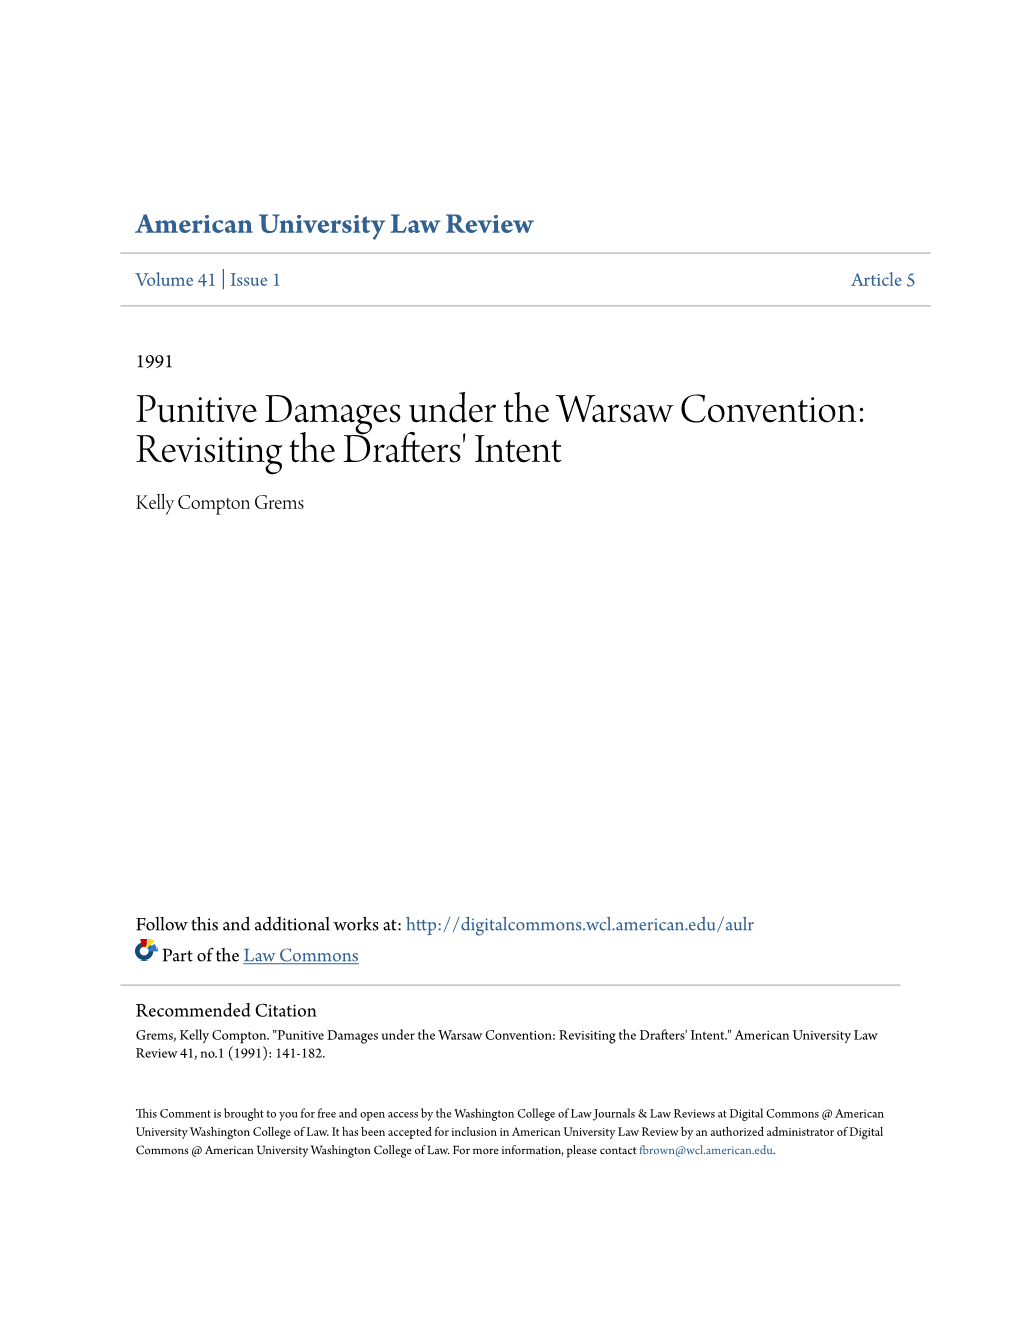 Punitive Damages Under the Warsaw Convention: Revisiting the Drafters' Intent Kelly Compton Grems